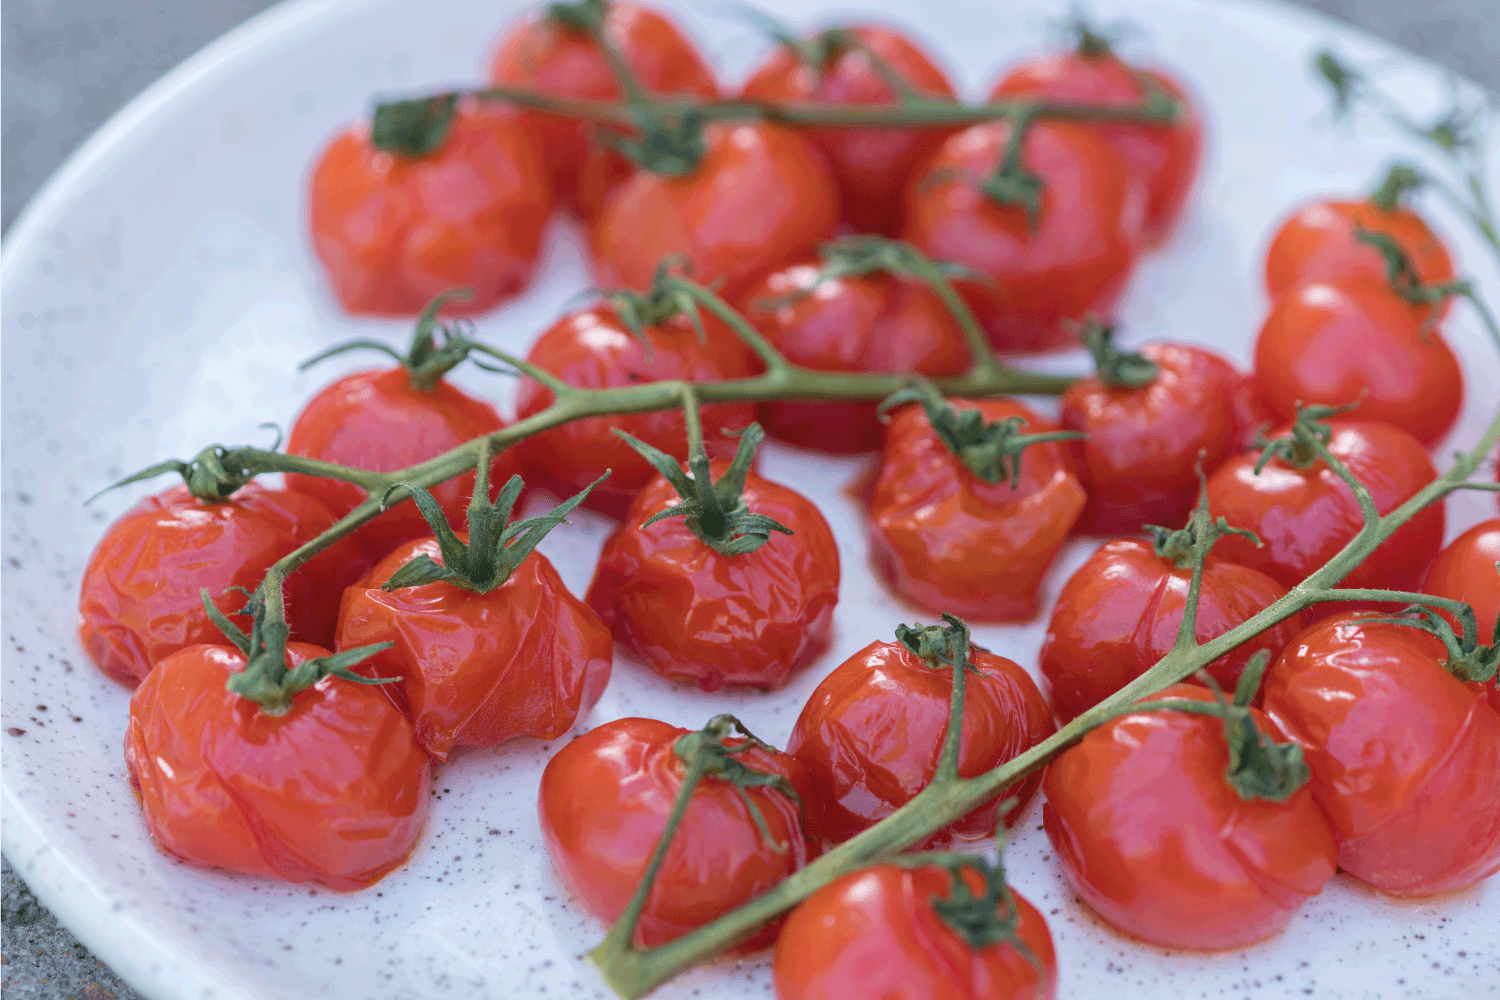 Grilled tomatoes with olive oil, garlic, salt and pepper